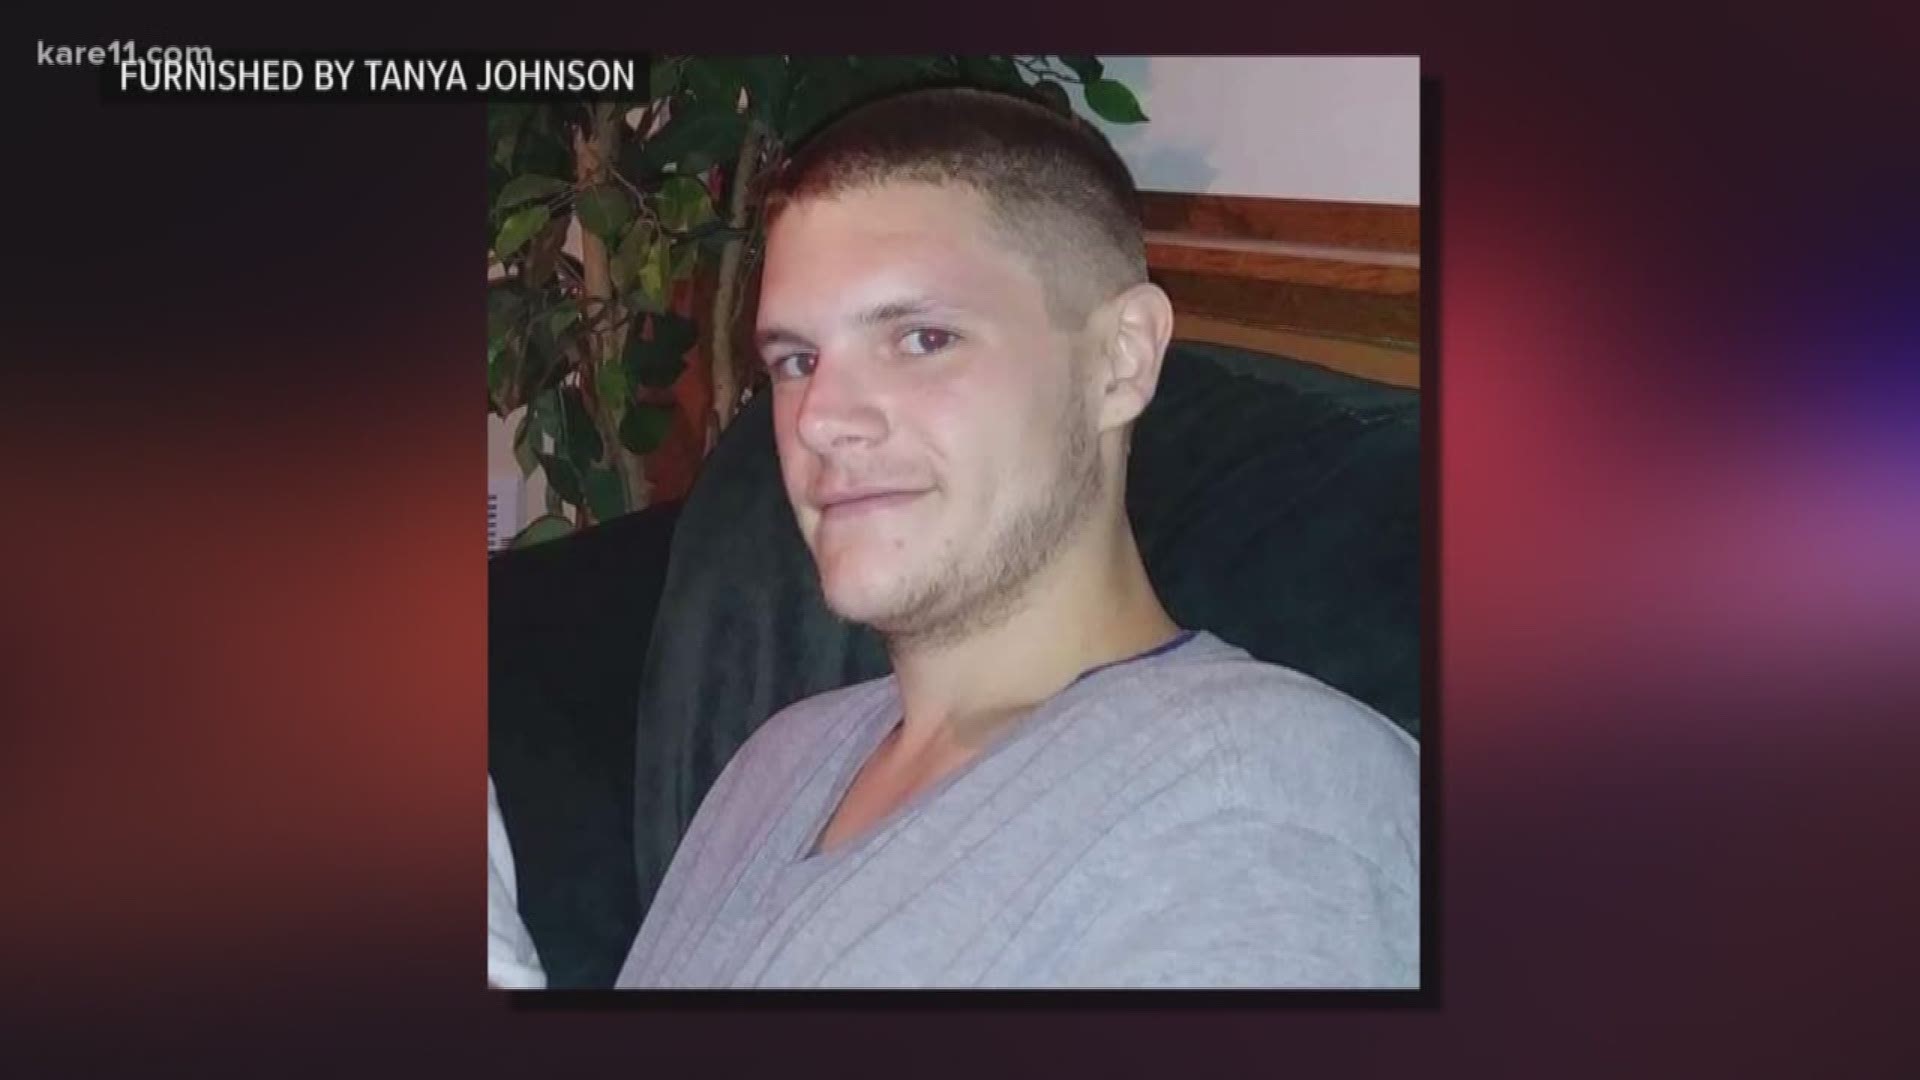 The man killed by police in Hastings Monday night has been identified by his family as 23-year-old Keagan Johnson-Lloyd. His family says he has battled mental illness and drug addiction for years. https://kare11.tv/2yiAWvx